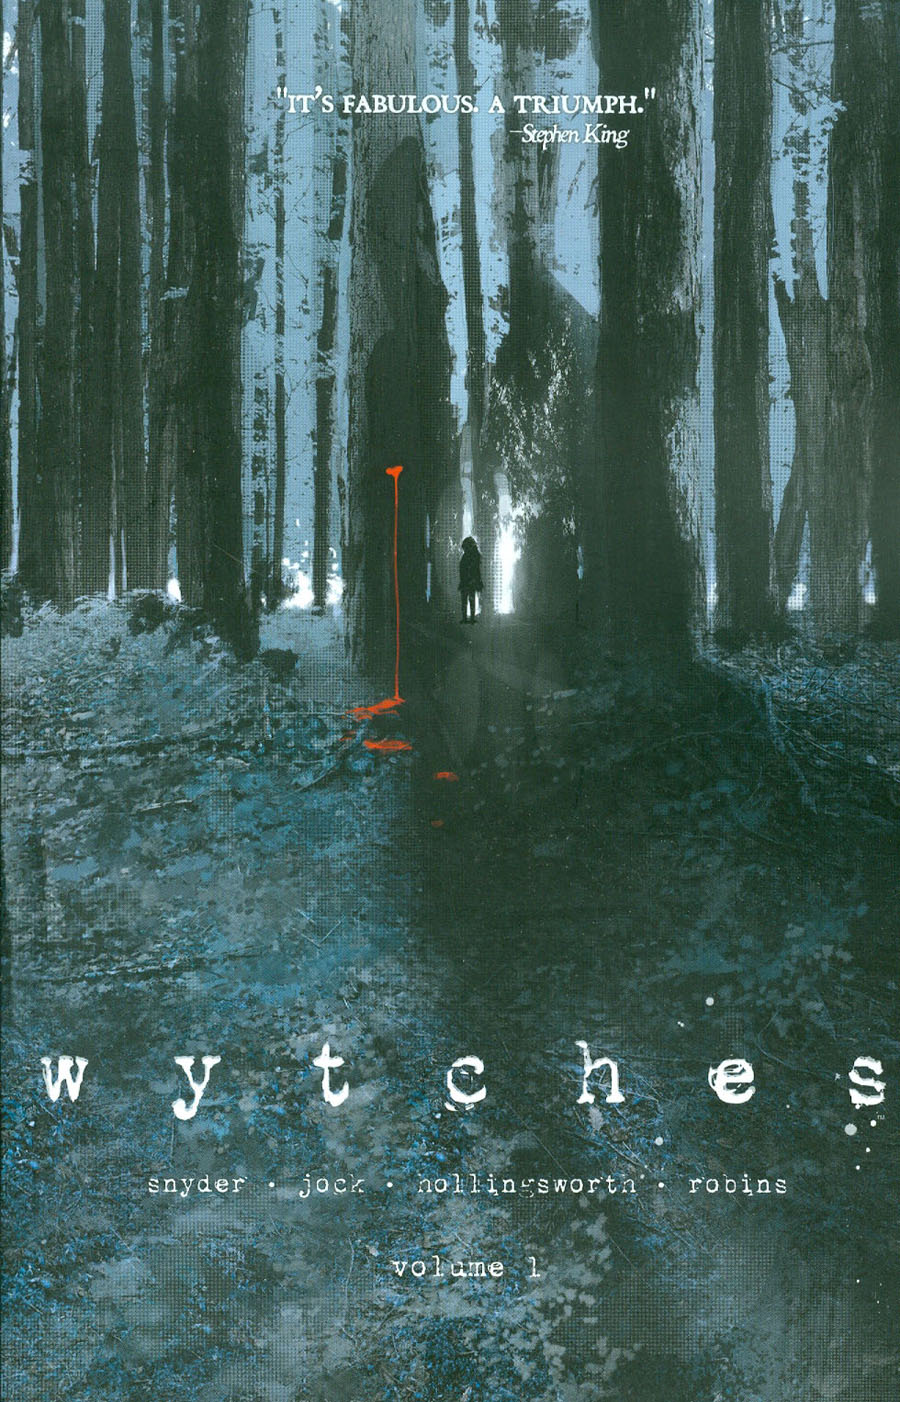 Wytches Vol 1 TP